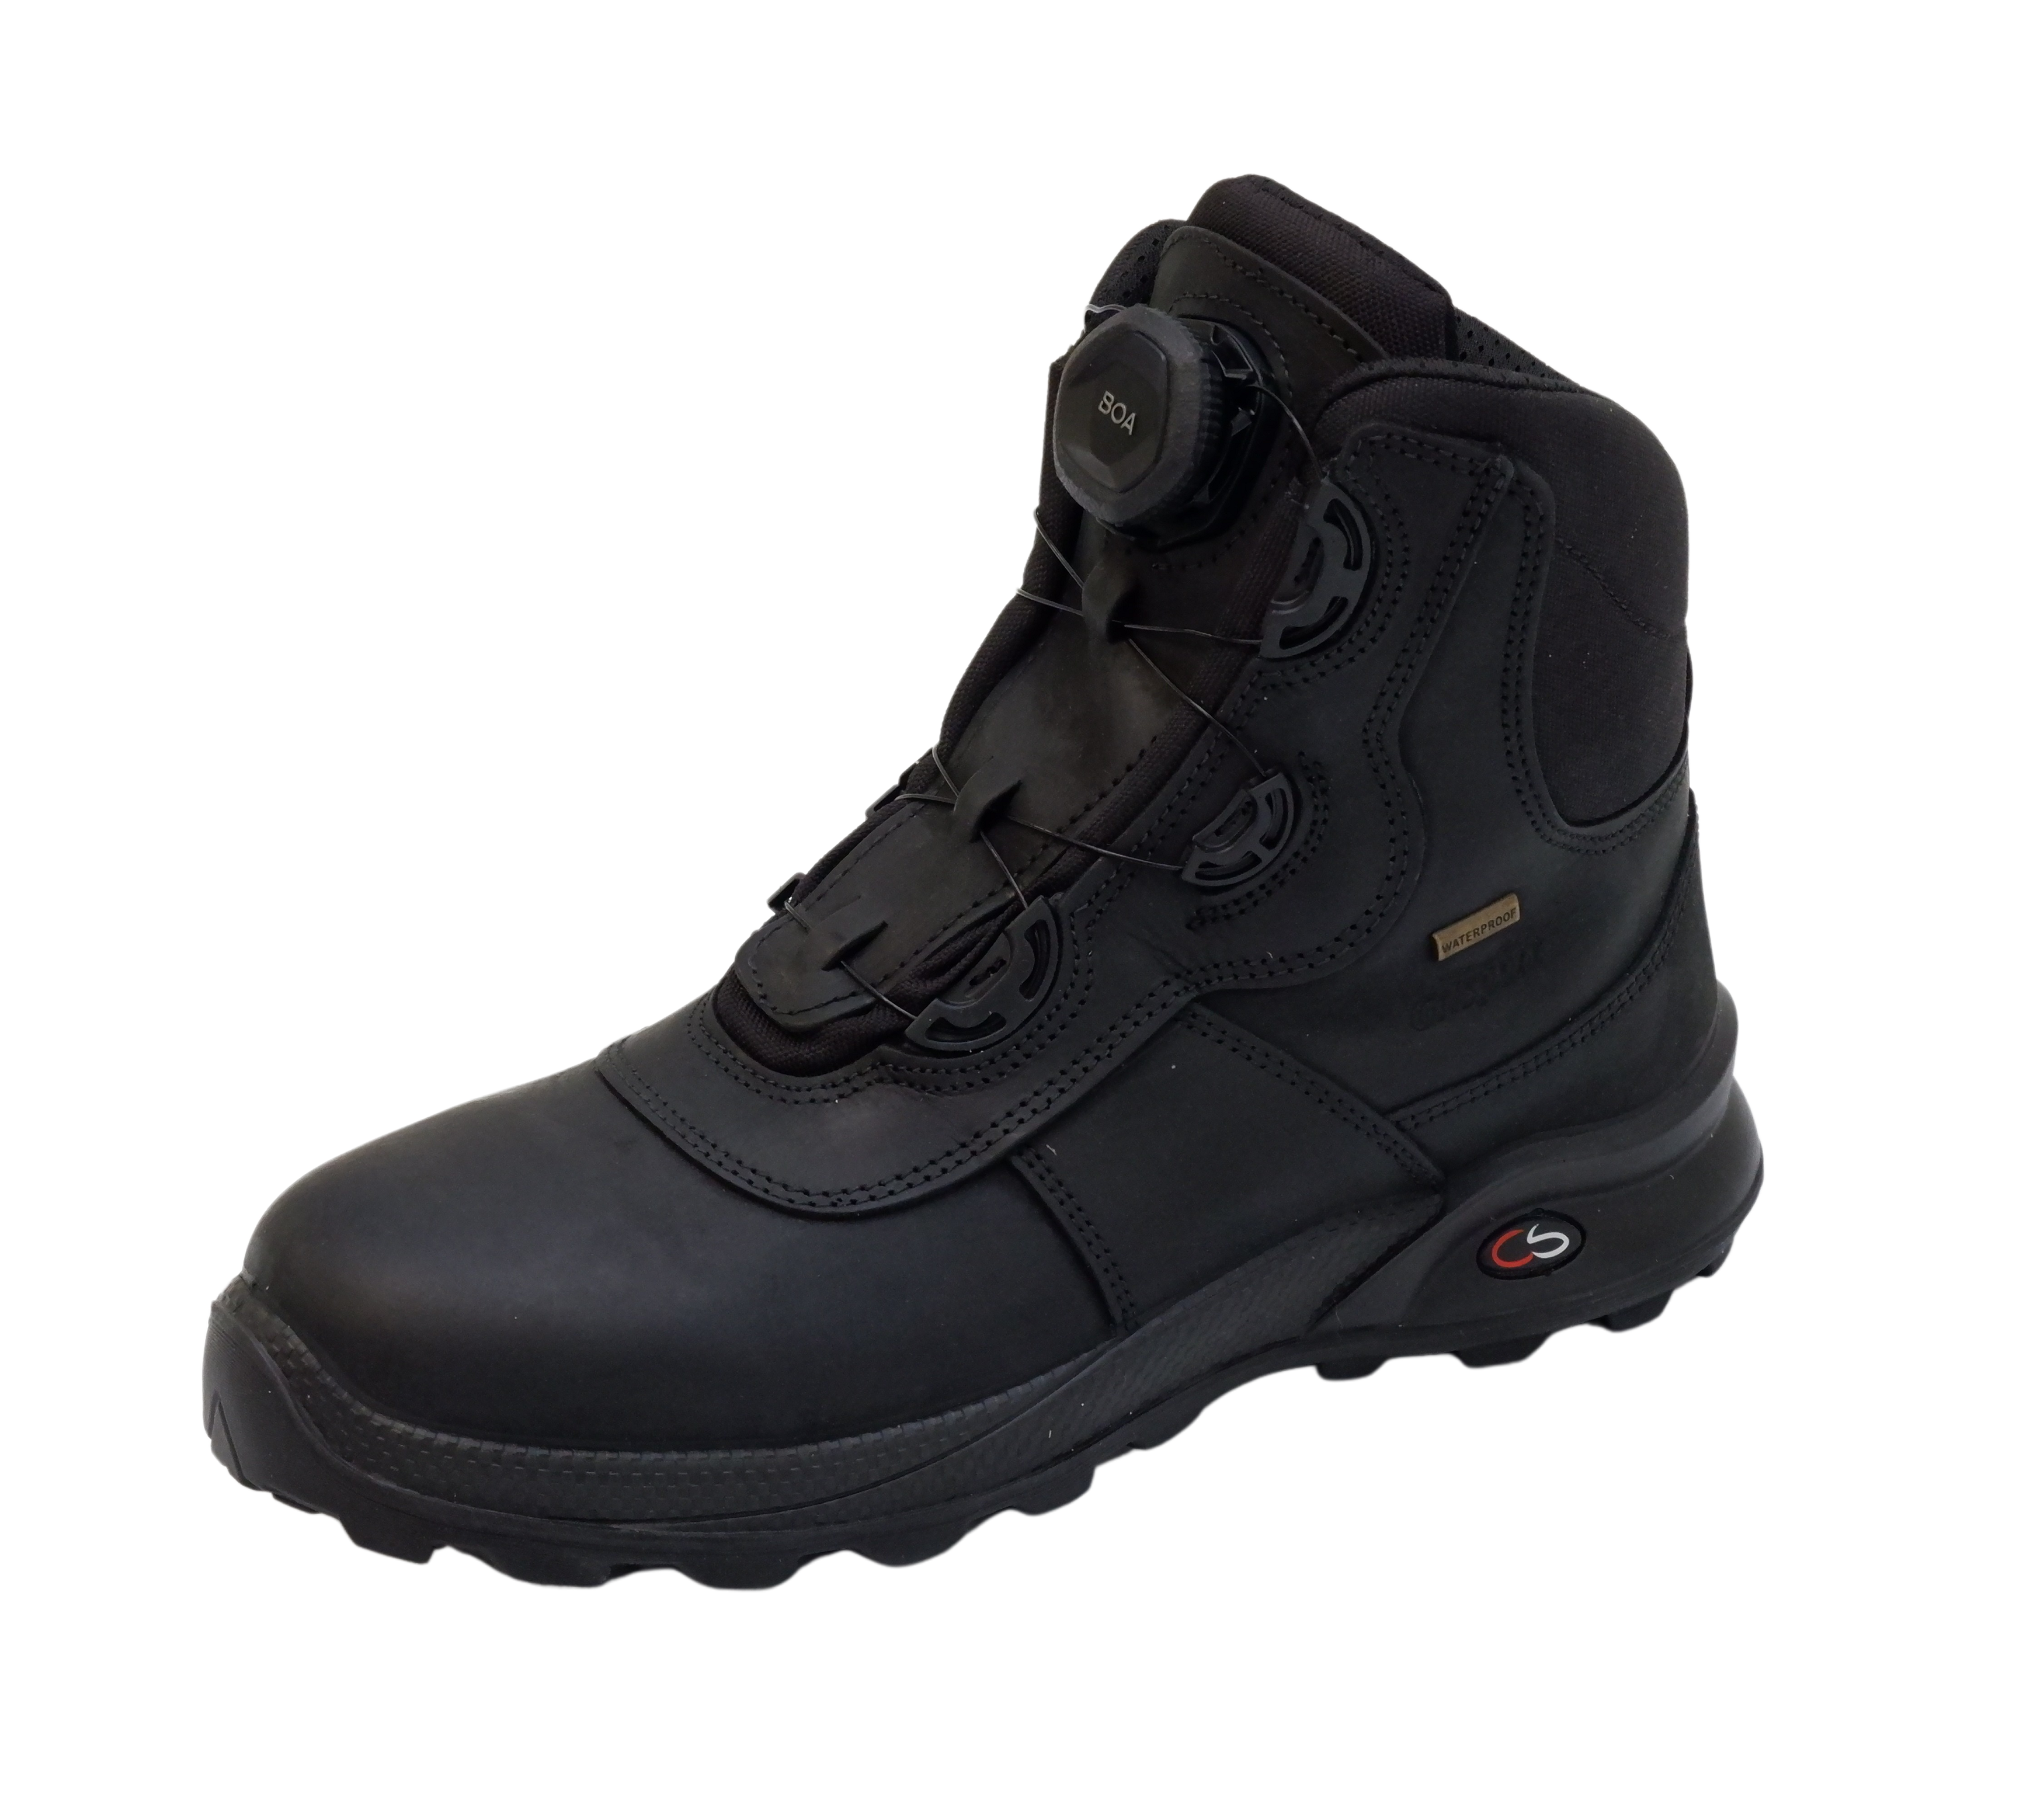 Grisport Men's BOA Tactical Boot 6" Non-Safety Waterproof Leather Sizes 4-14